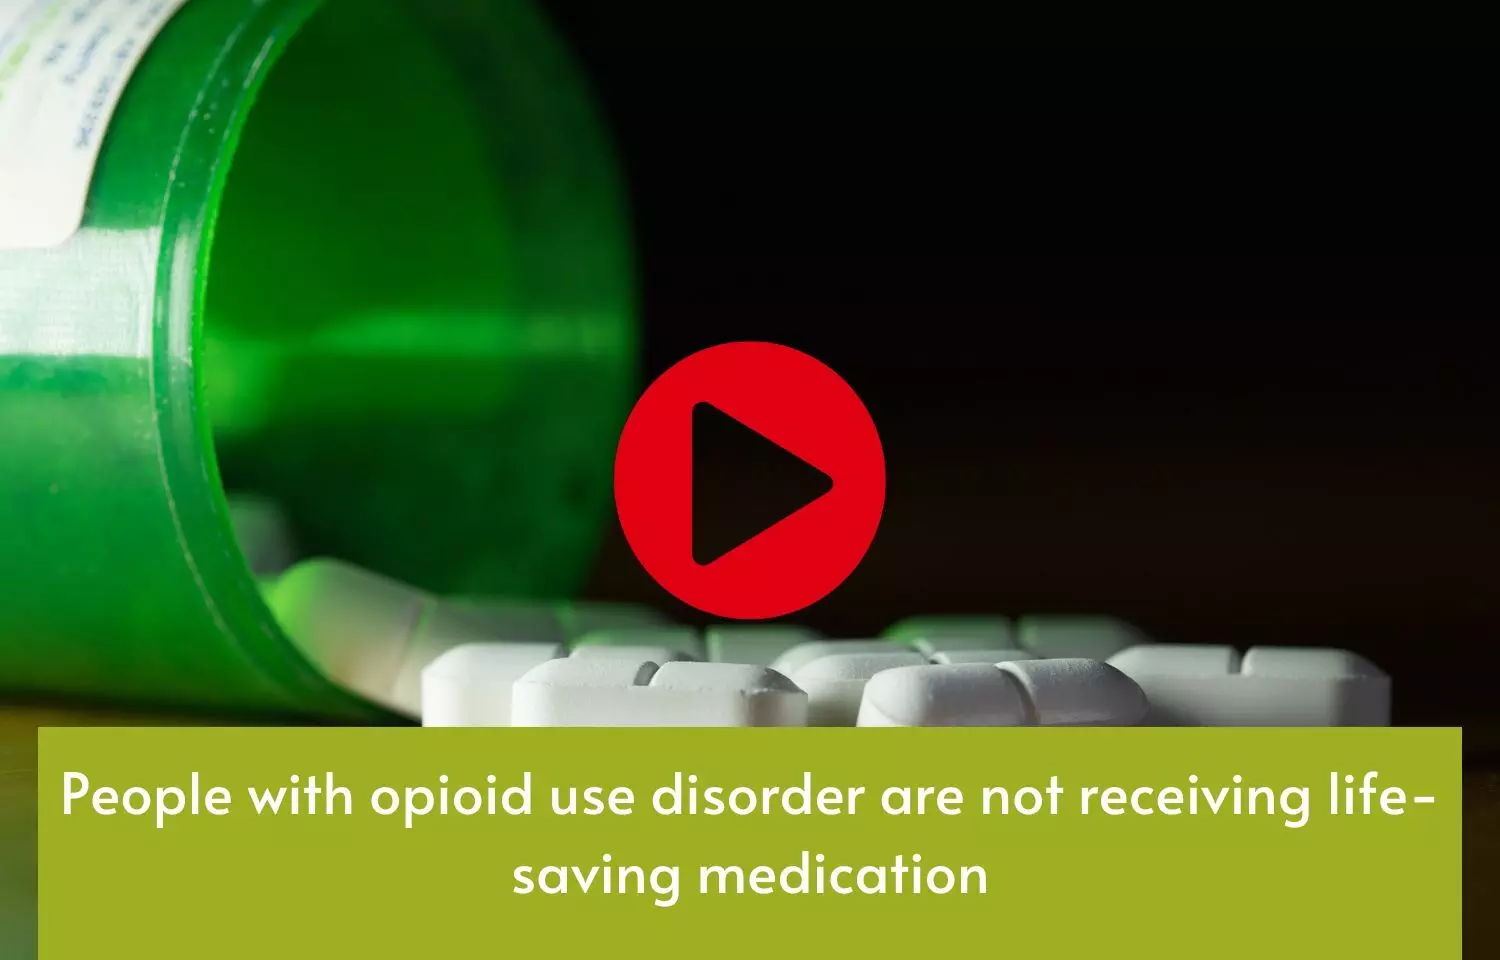 People with opioid use disorder are not receiving life-saving medication